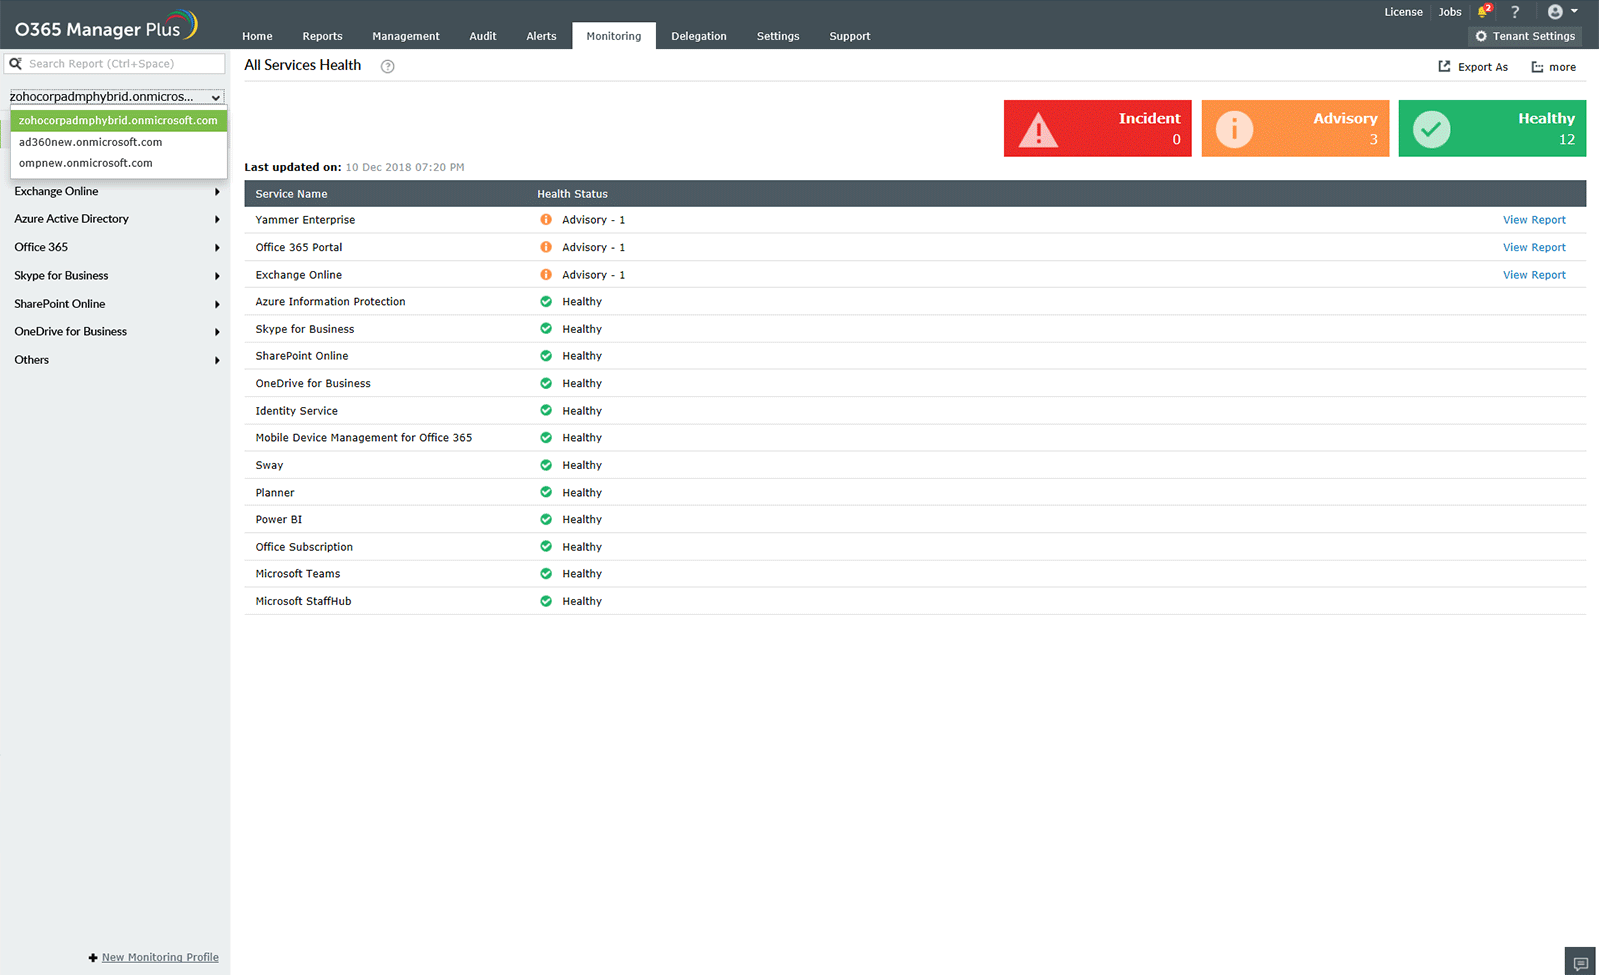 Monitor multiple tenants from a single dashboard